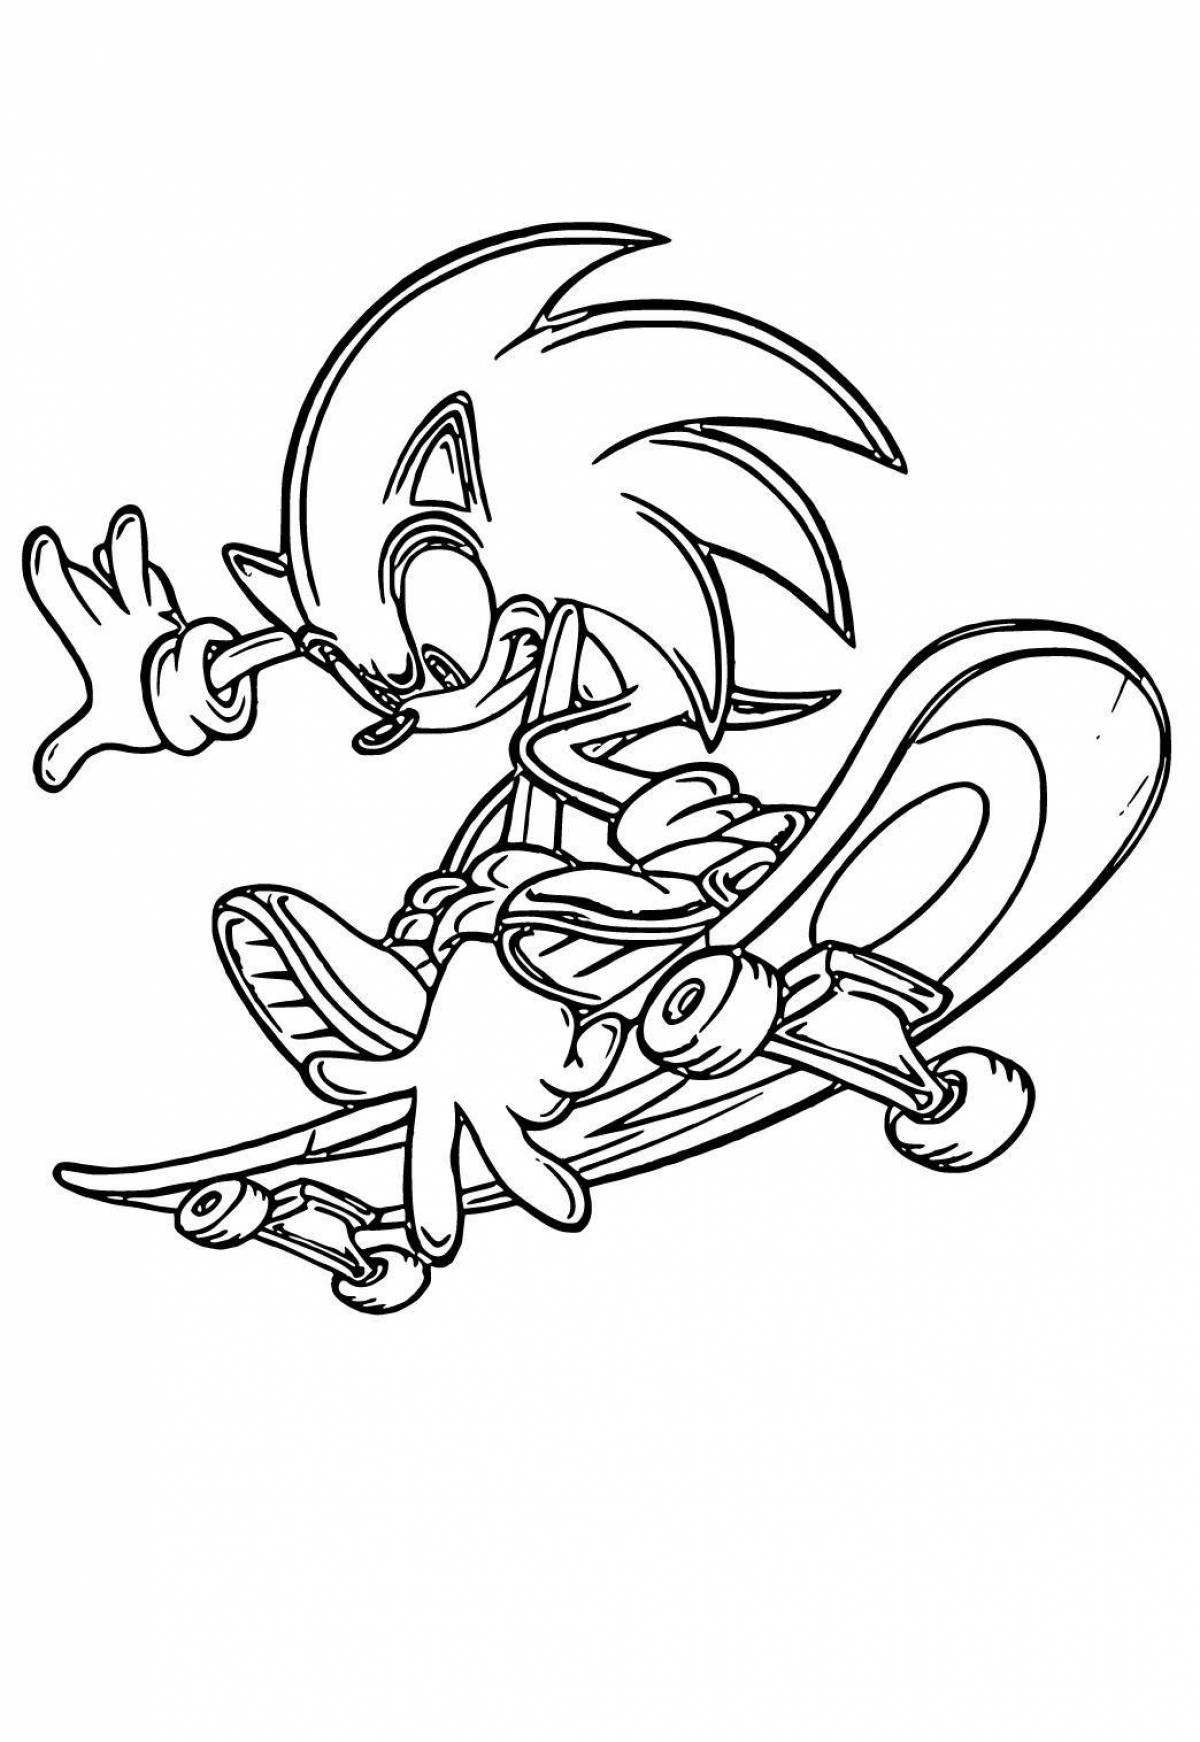 Color-frenzy coloring page eggman